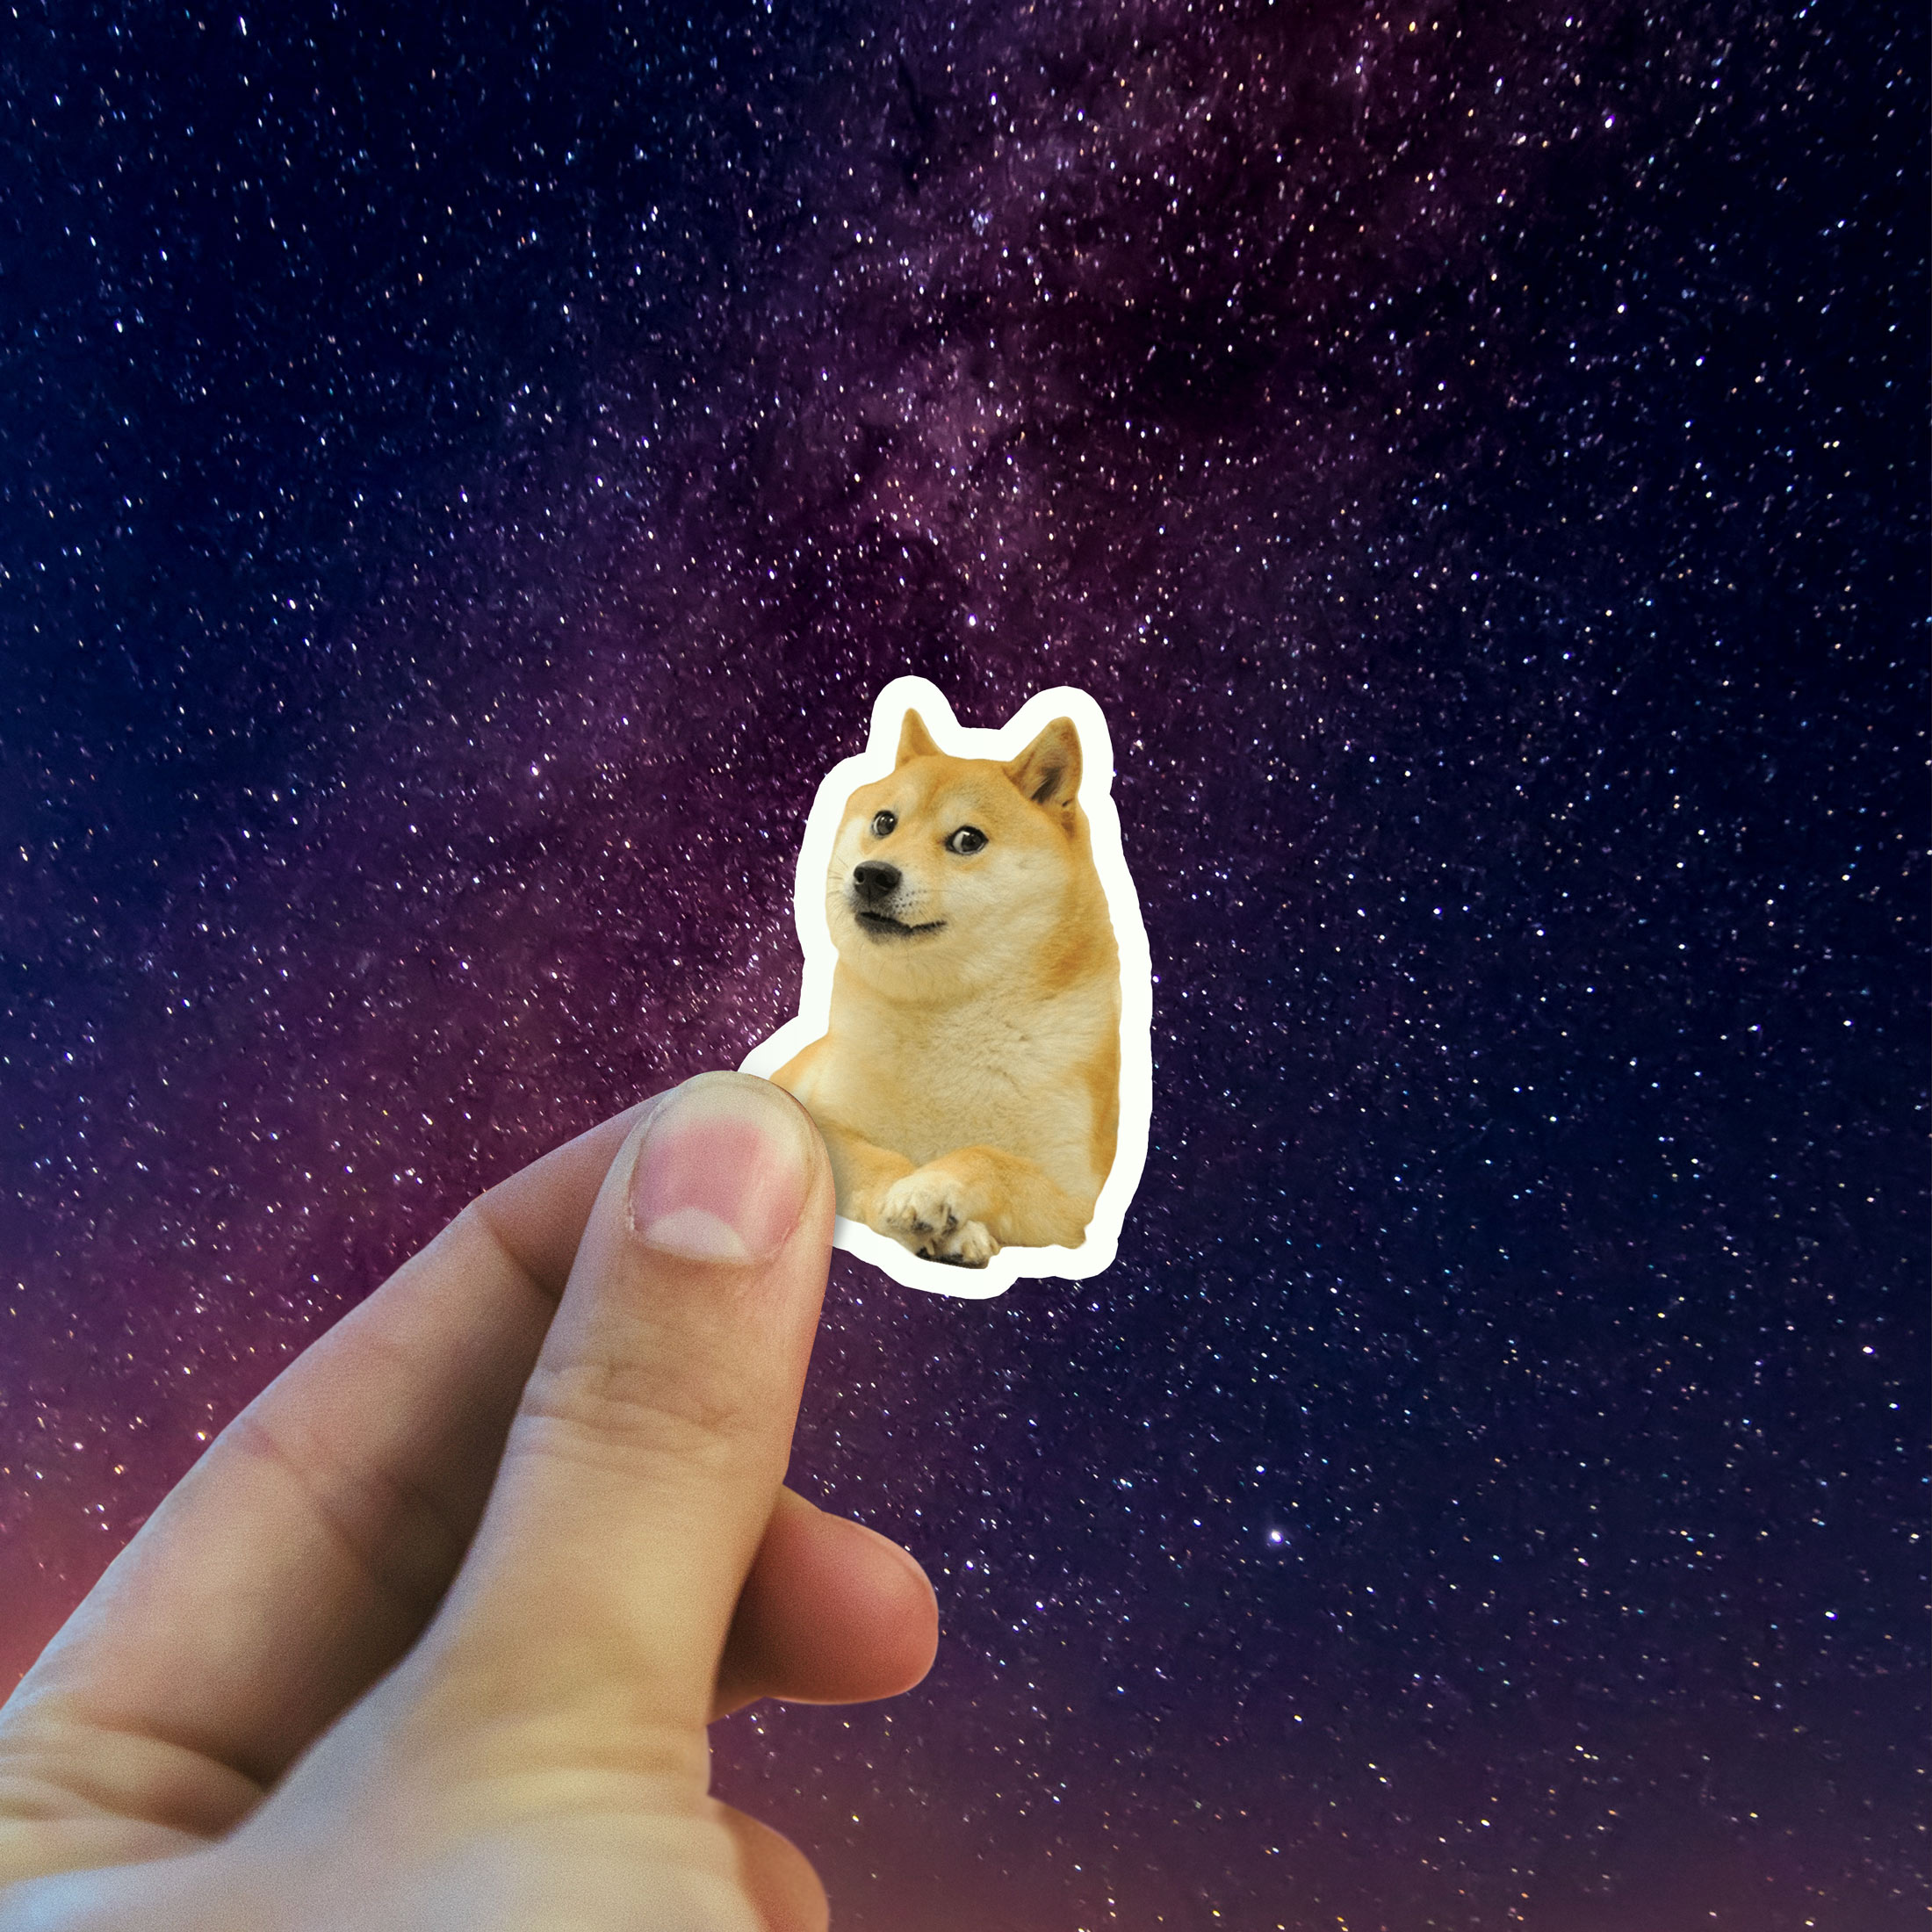 Dogecoin sticker holding in hand